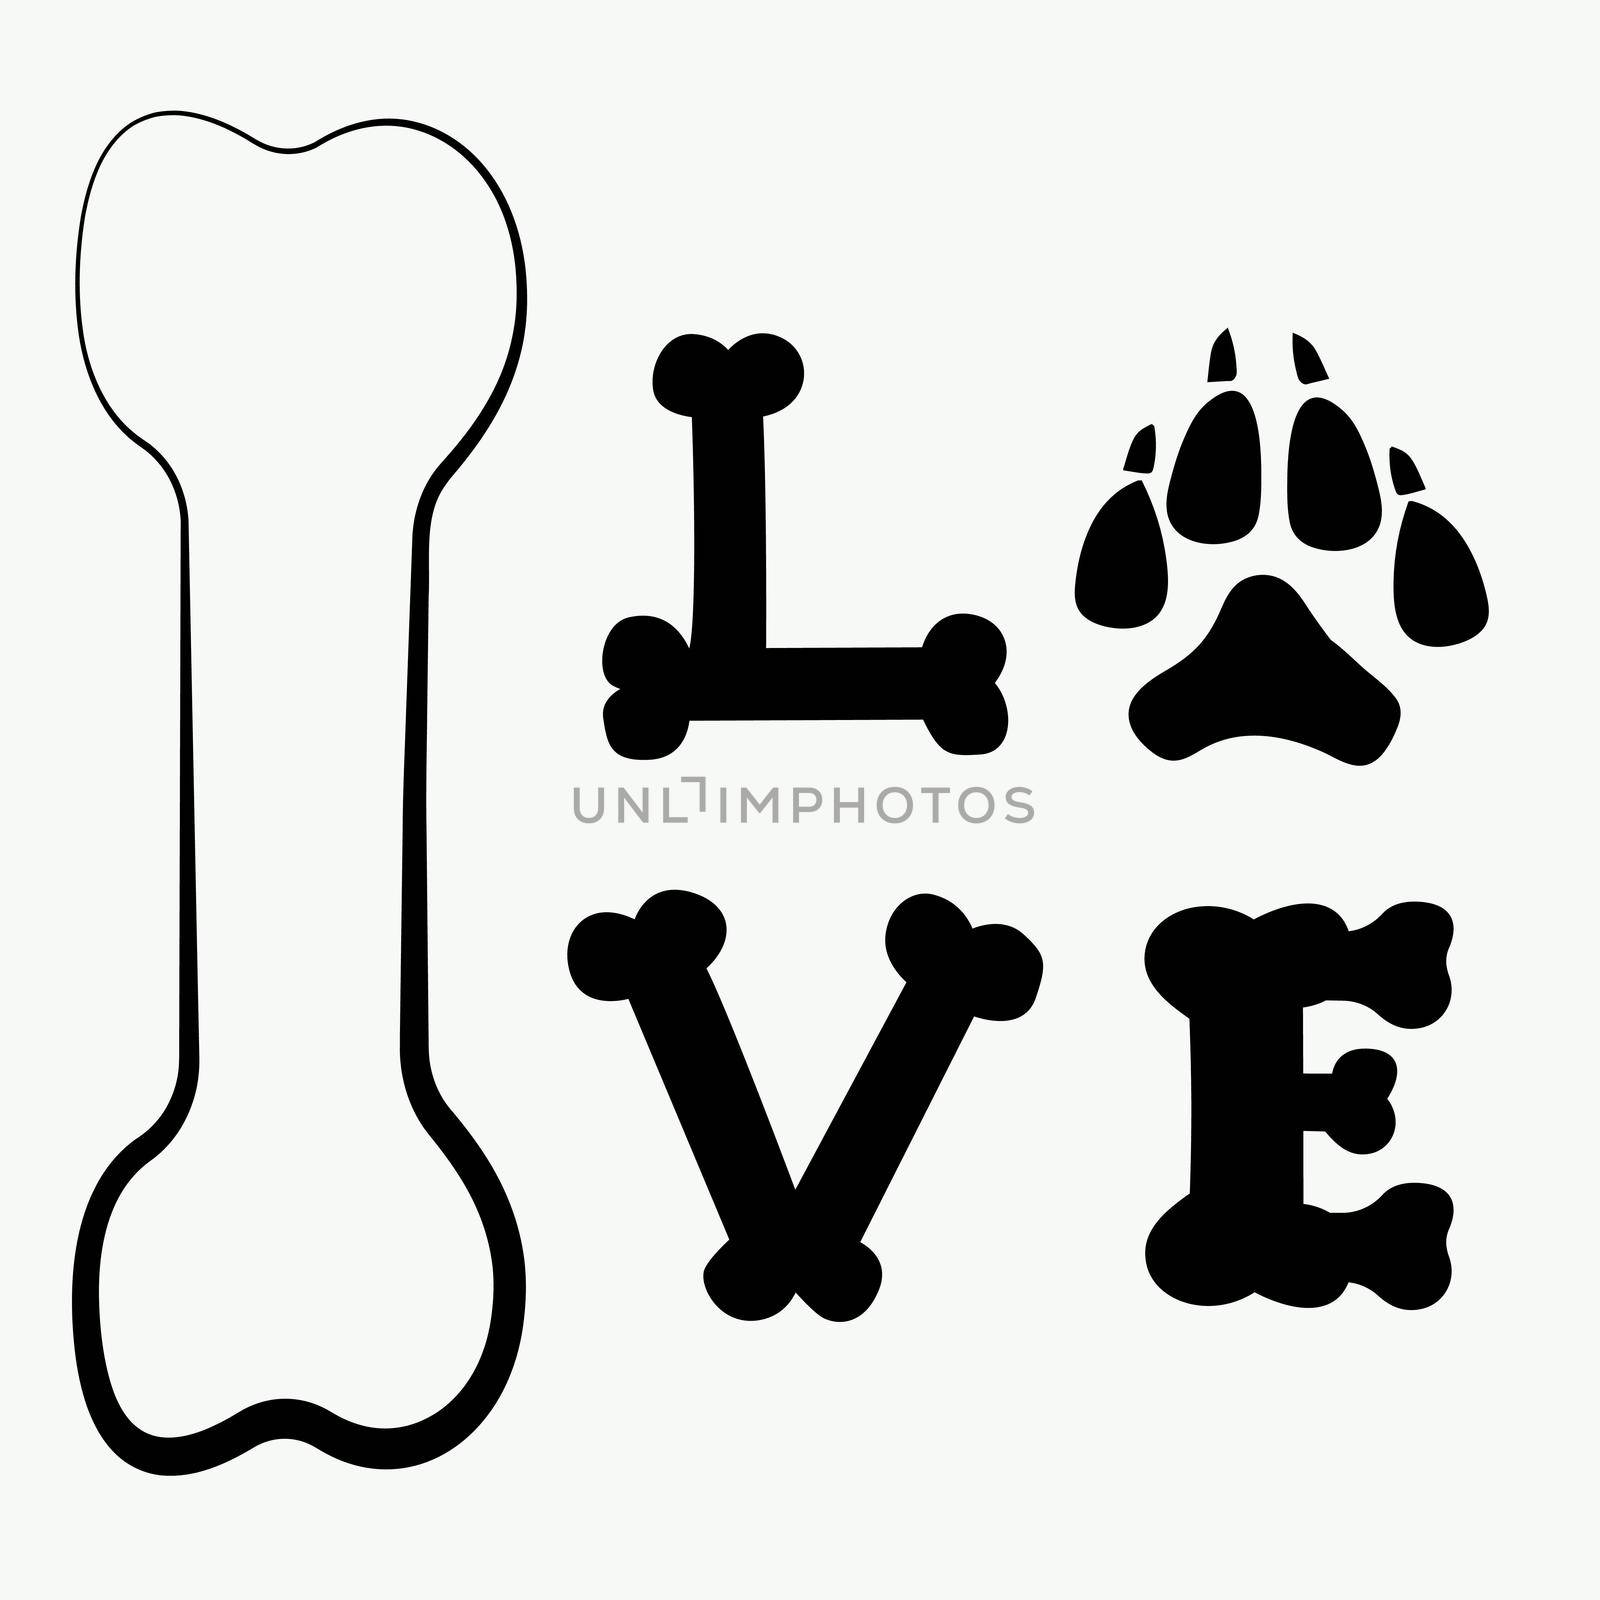 A simple illustration with the concept of love of animals and nature.Vector Illustration.